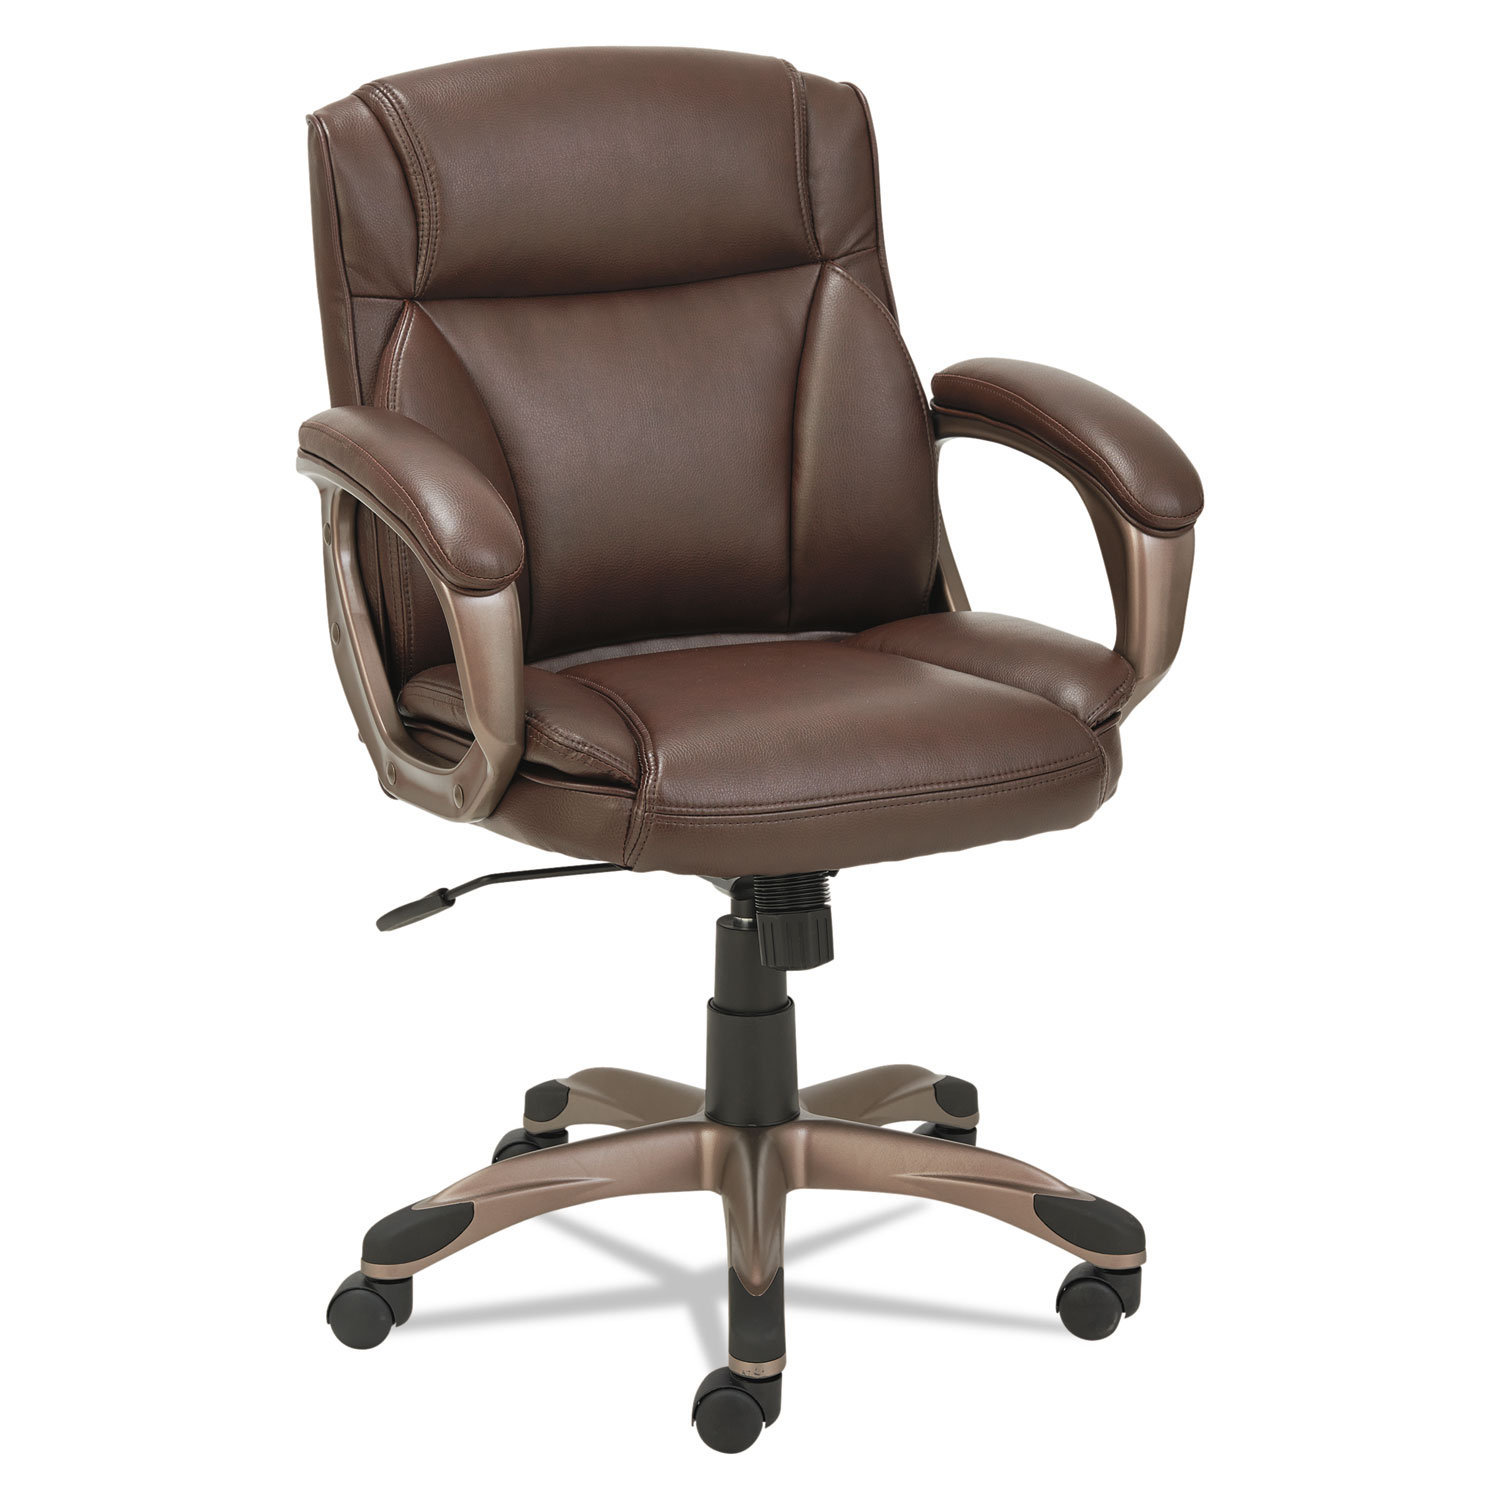  Alera ALEVN6159 Alera Veon Series Low-Back Leather Task Chair, Supports up to 275 lbs., Brown Seat/Brown Back, Bronze Base (ALEVN6159) 